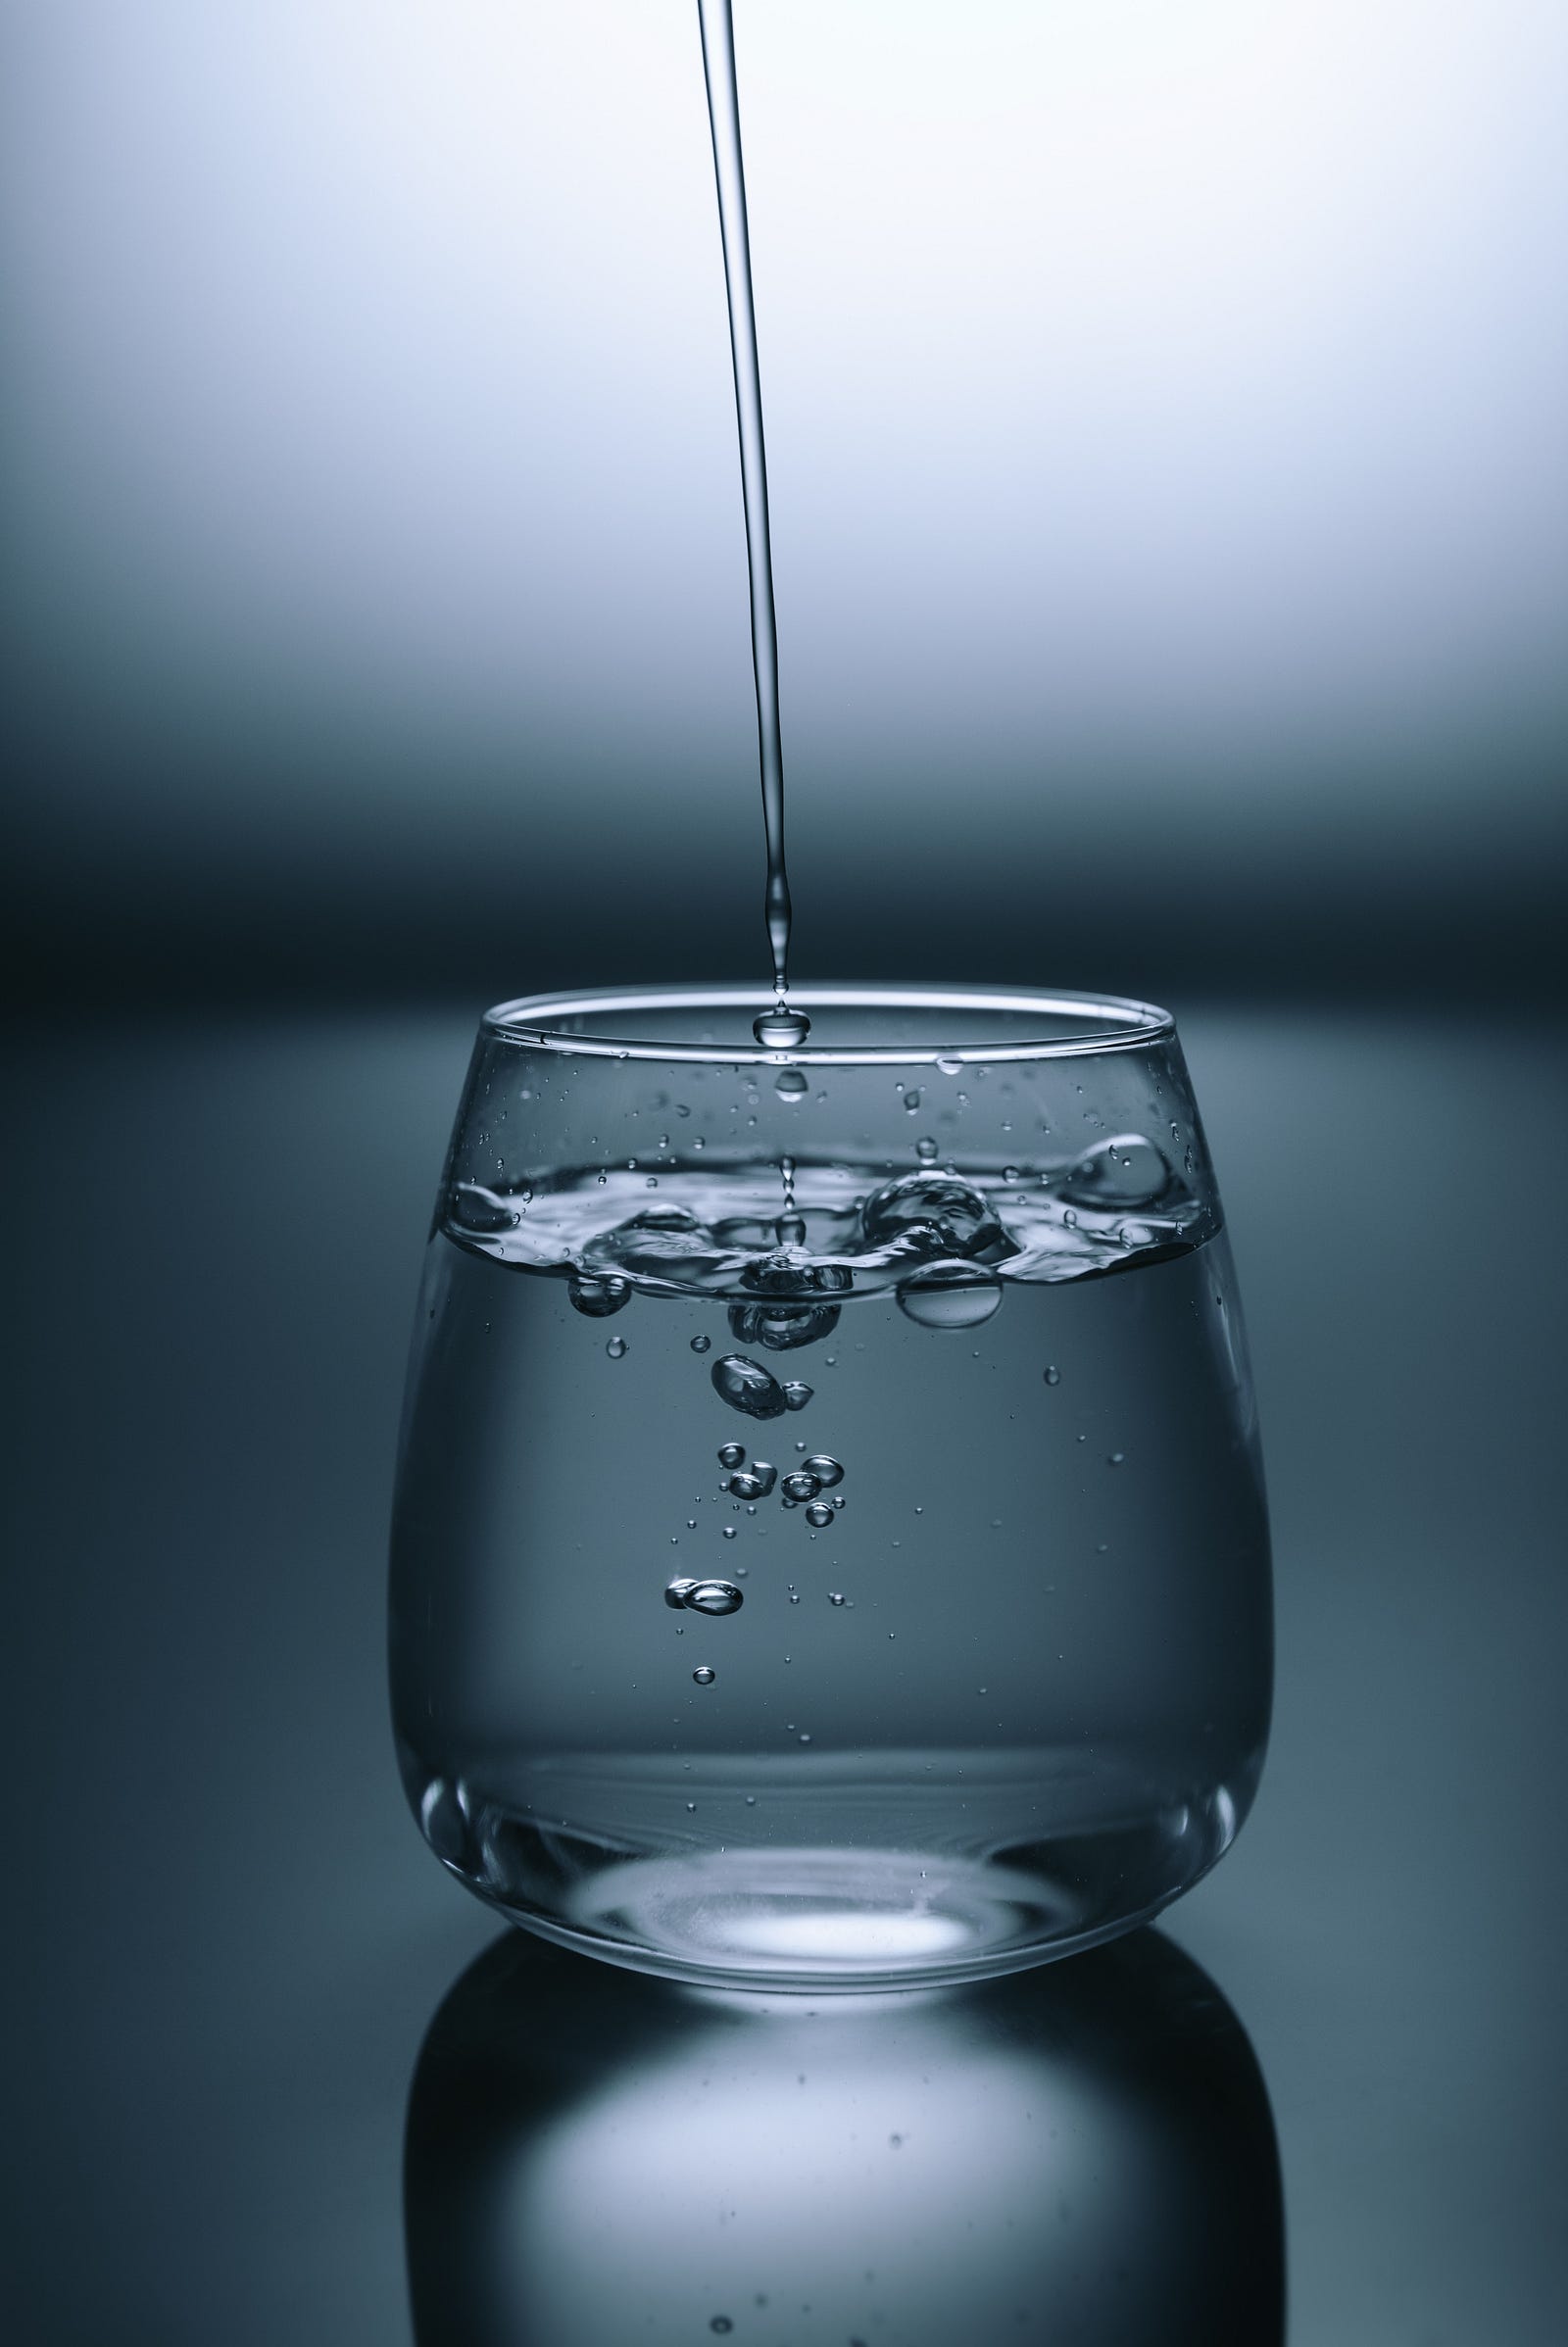 A stream of water pours from above into a nearly full drinking glass. Water is not only essential for overall well-being but can also aid in digestion and prevent overindulgence. If I consume any alcohol, I make it a point to alternate alcoholic drinks with water and consider infusing water with seasonal fruits for a refreshing twist.